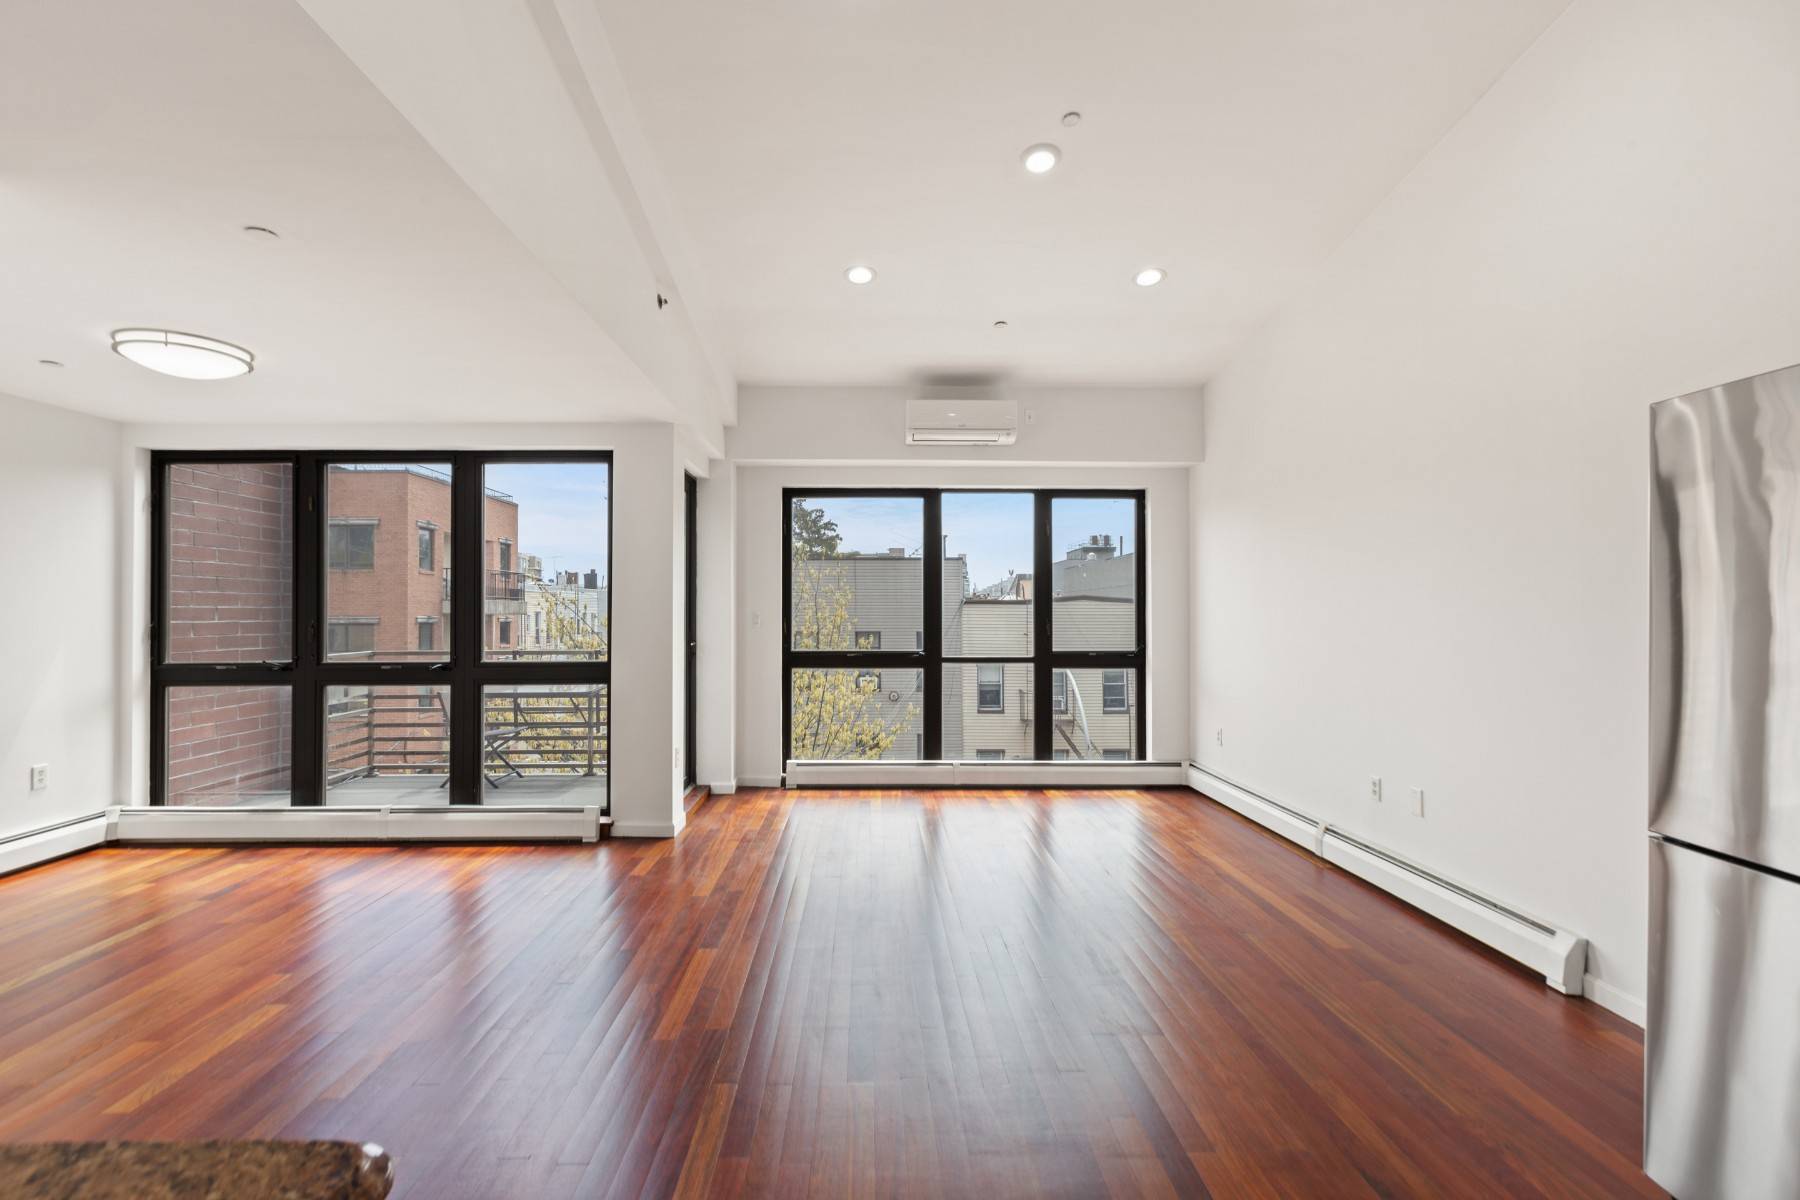 Welcome to the epitome of urban luxury living at 179 Jackson St Condominium.